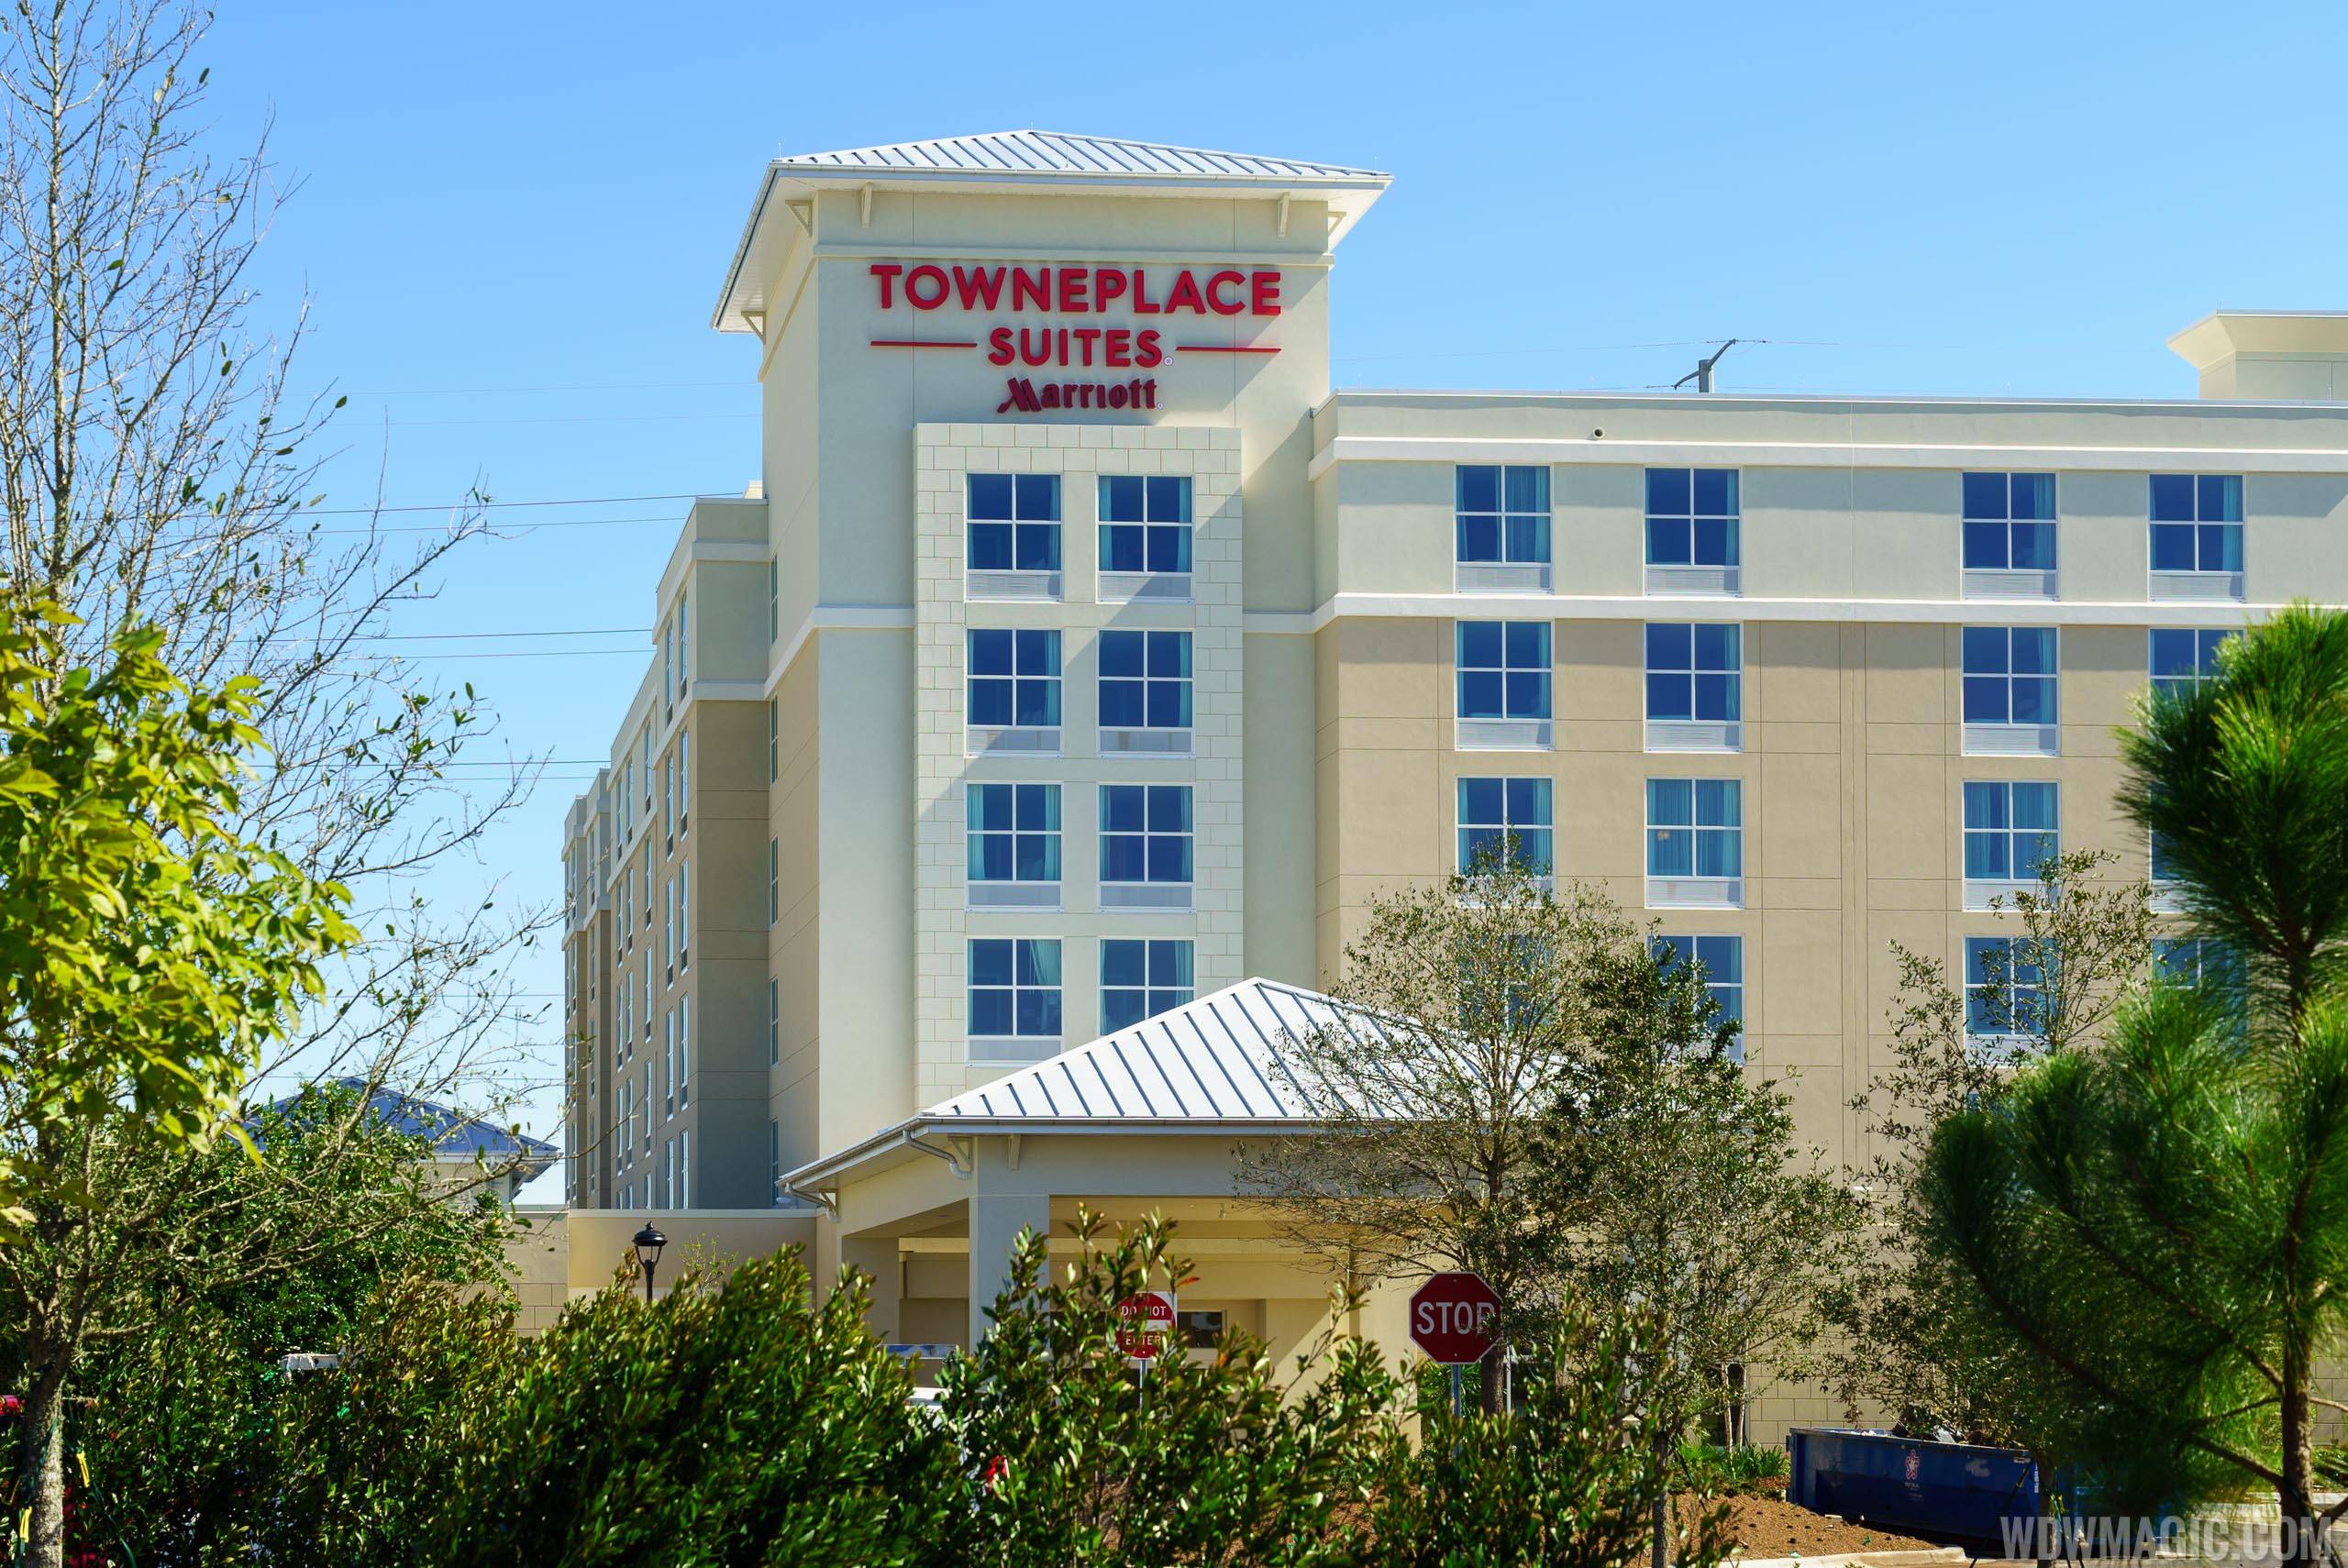 TownePlace Suites at Flamingo Crossings